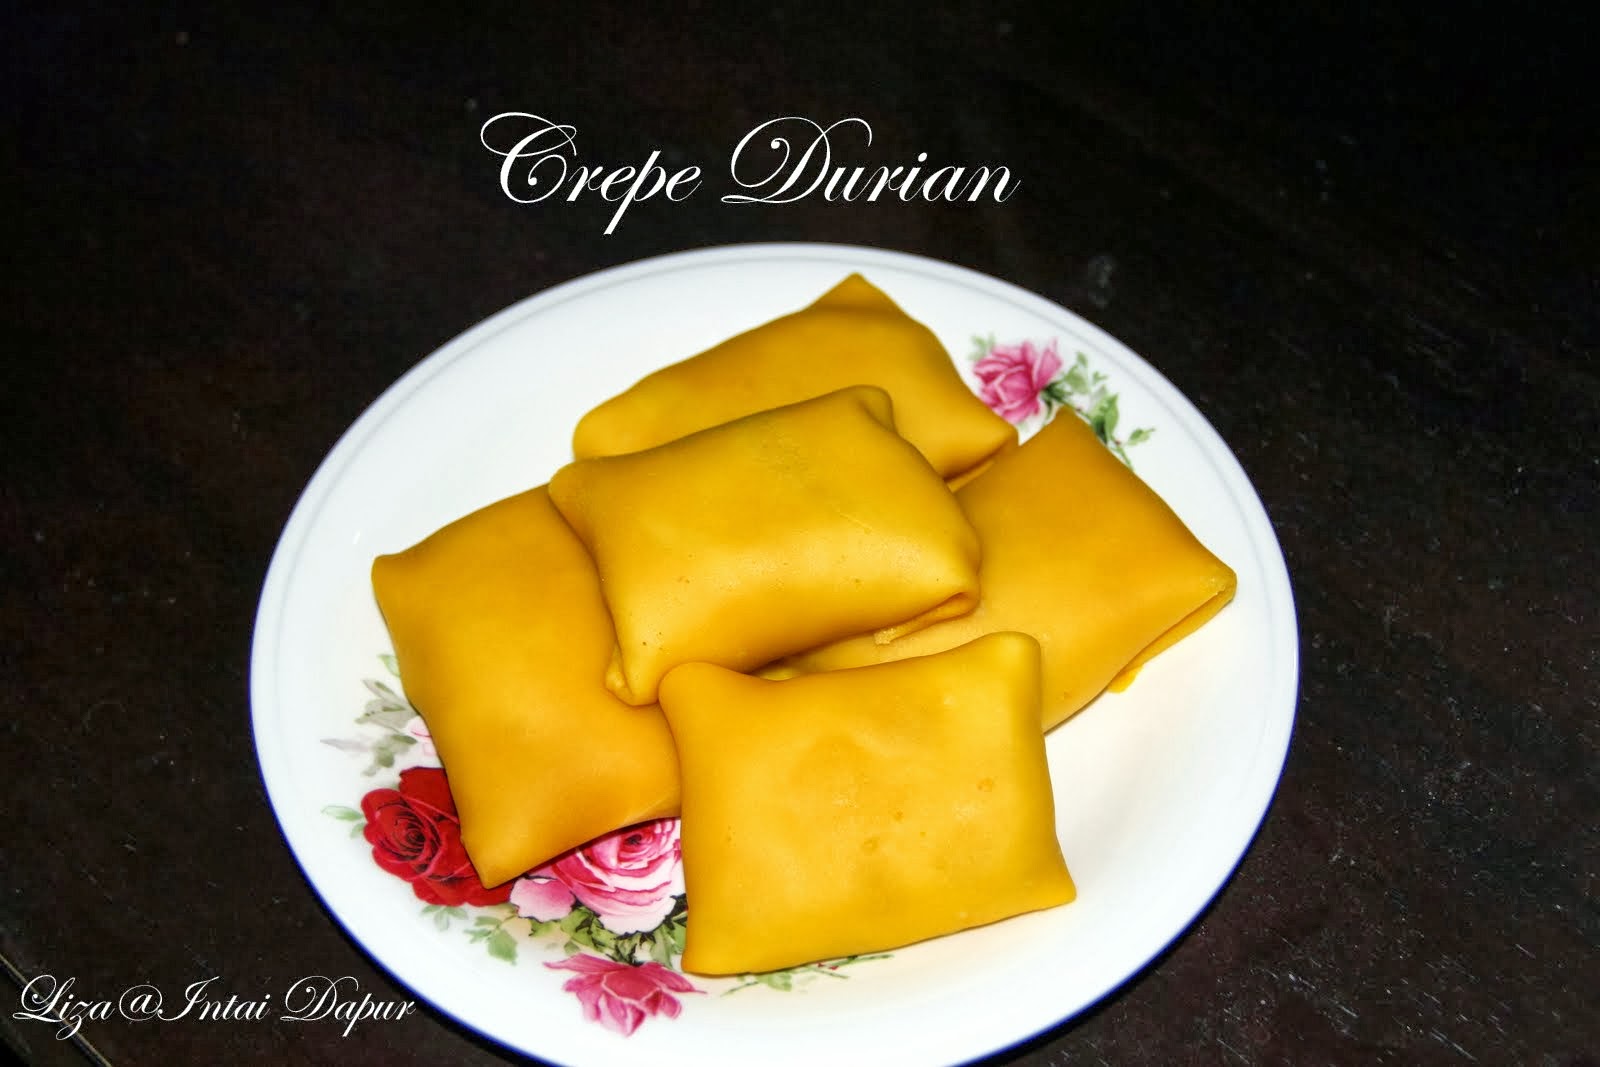 My Resepi Durian Crepe - Rungon f